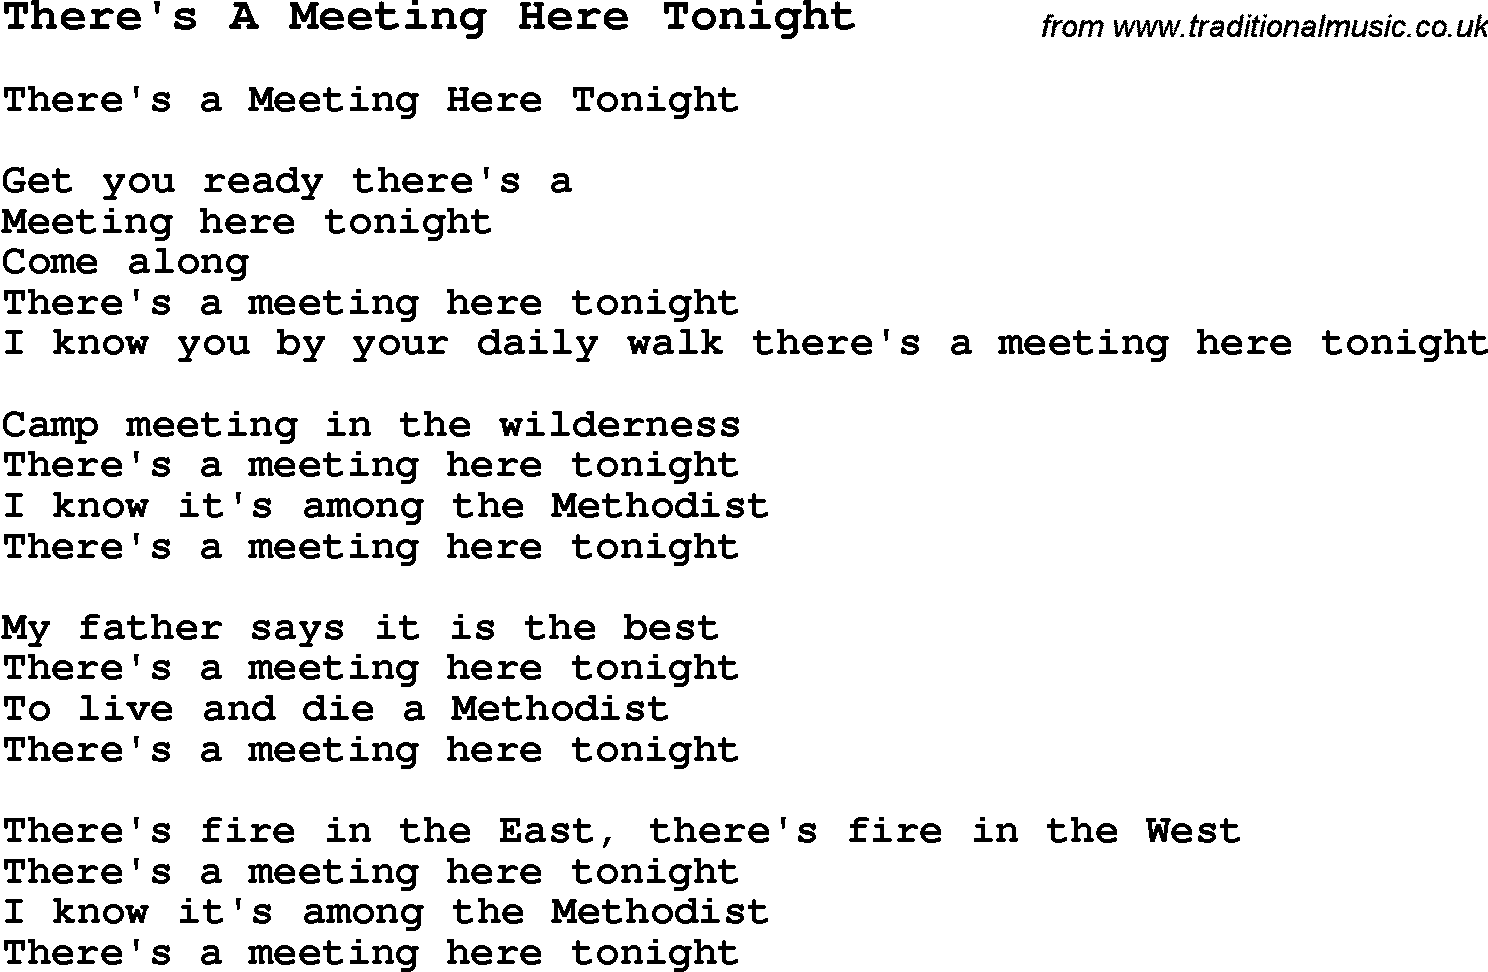 Negro Spiritual Song Lyrics for There's A Meeting Here Tonight